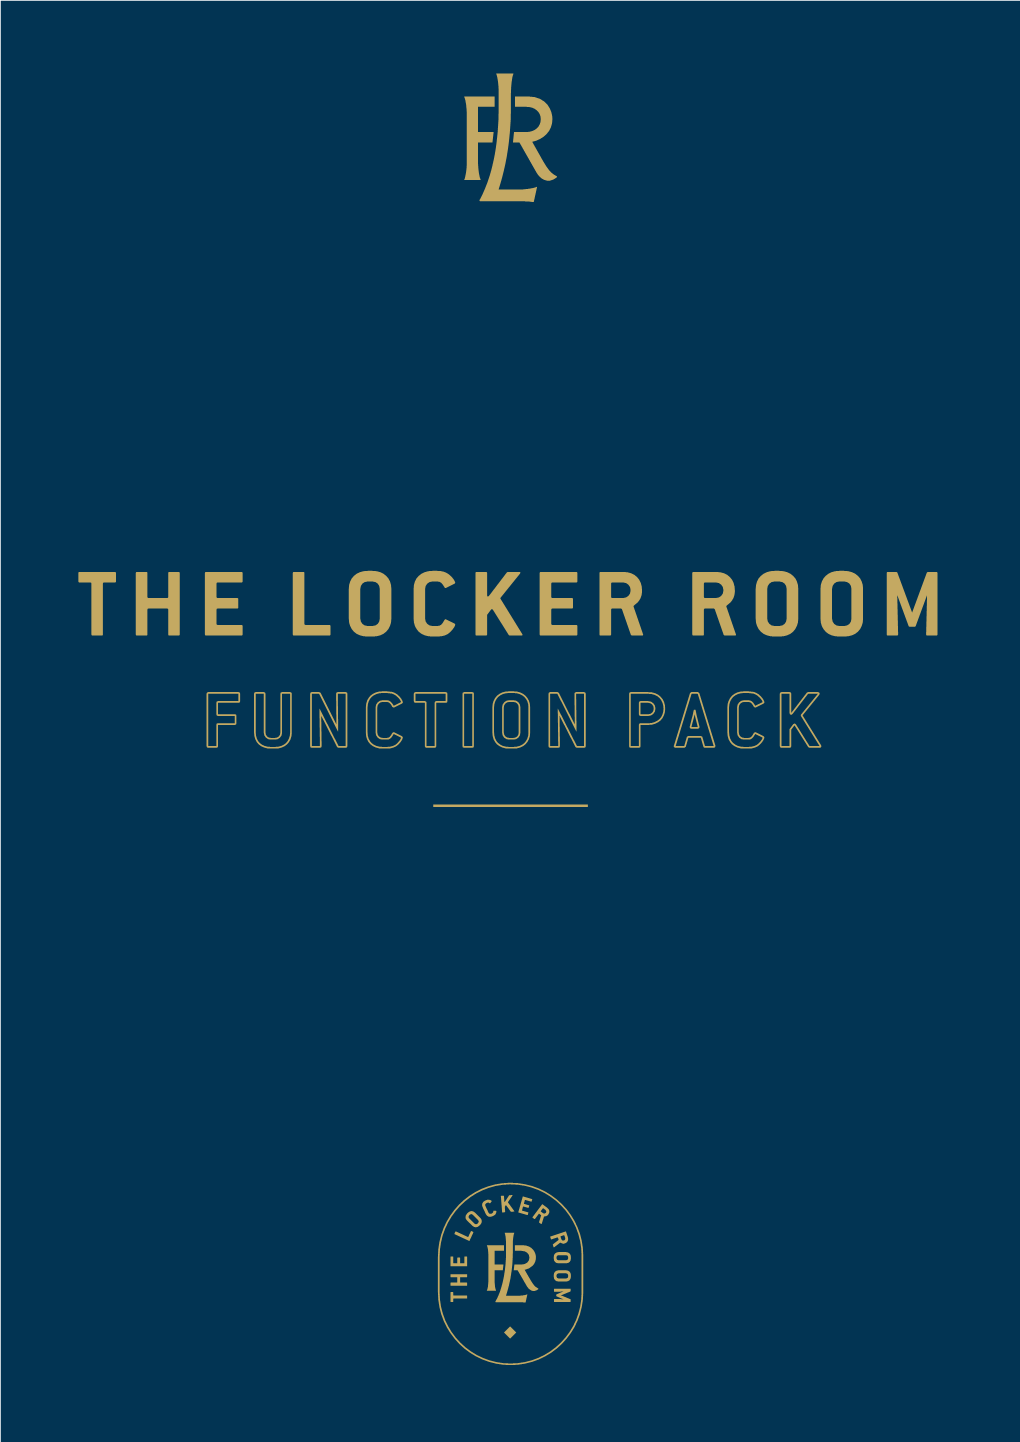 View Our Functions Pack